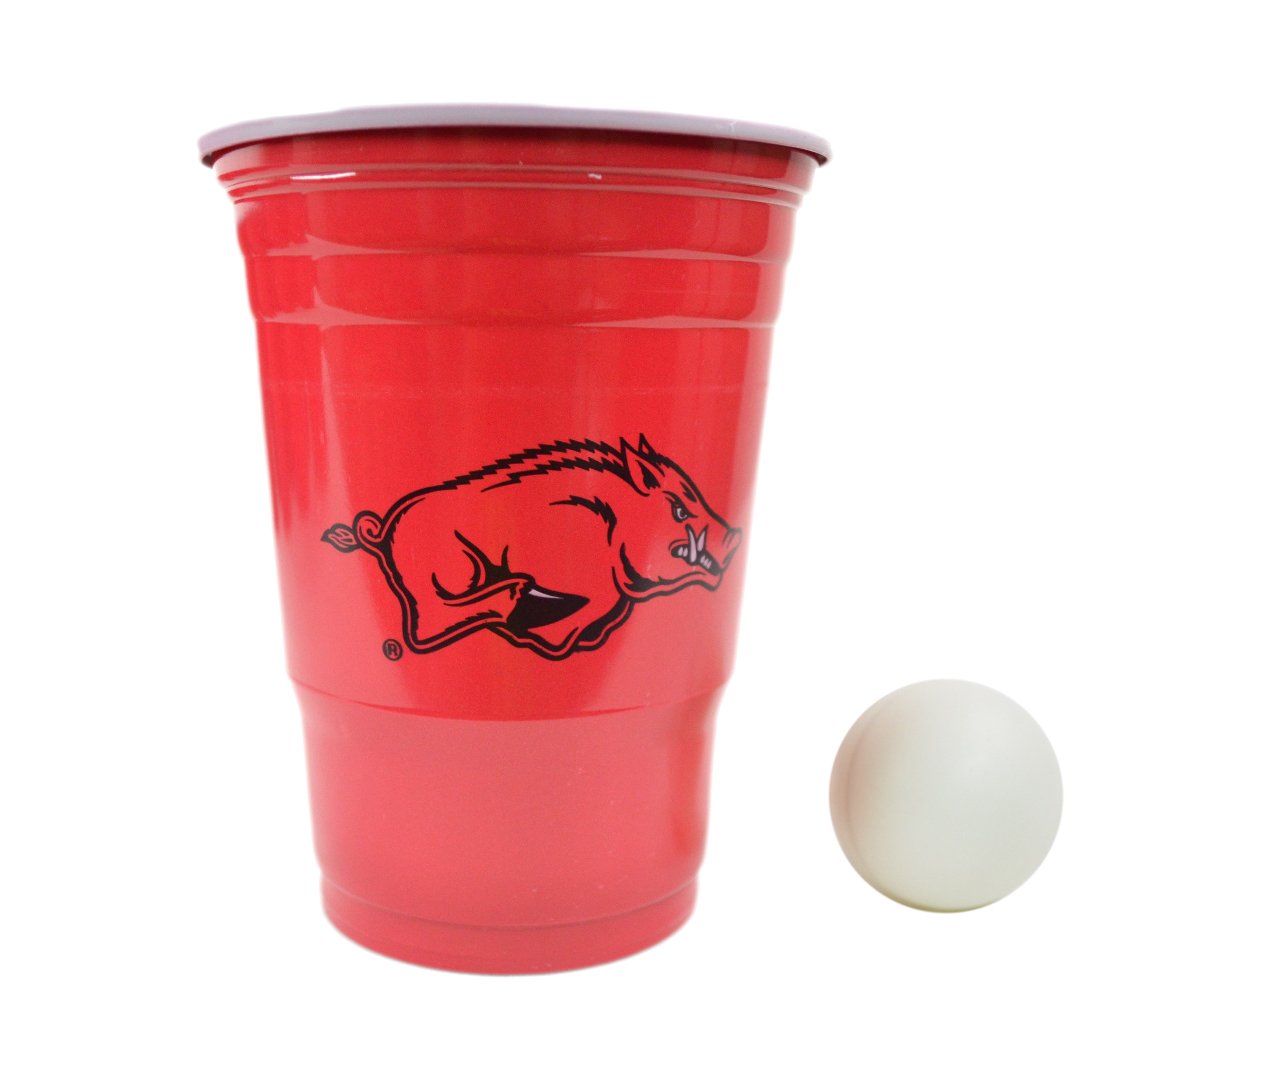 NCAA Fan Shop Beer Pong Set. Rep Your School, Alma Mater or Favorite Team with The Classic Game of College Beer Pong - Comes with 22 Cups and 6 Ping Pong Balls